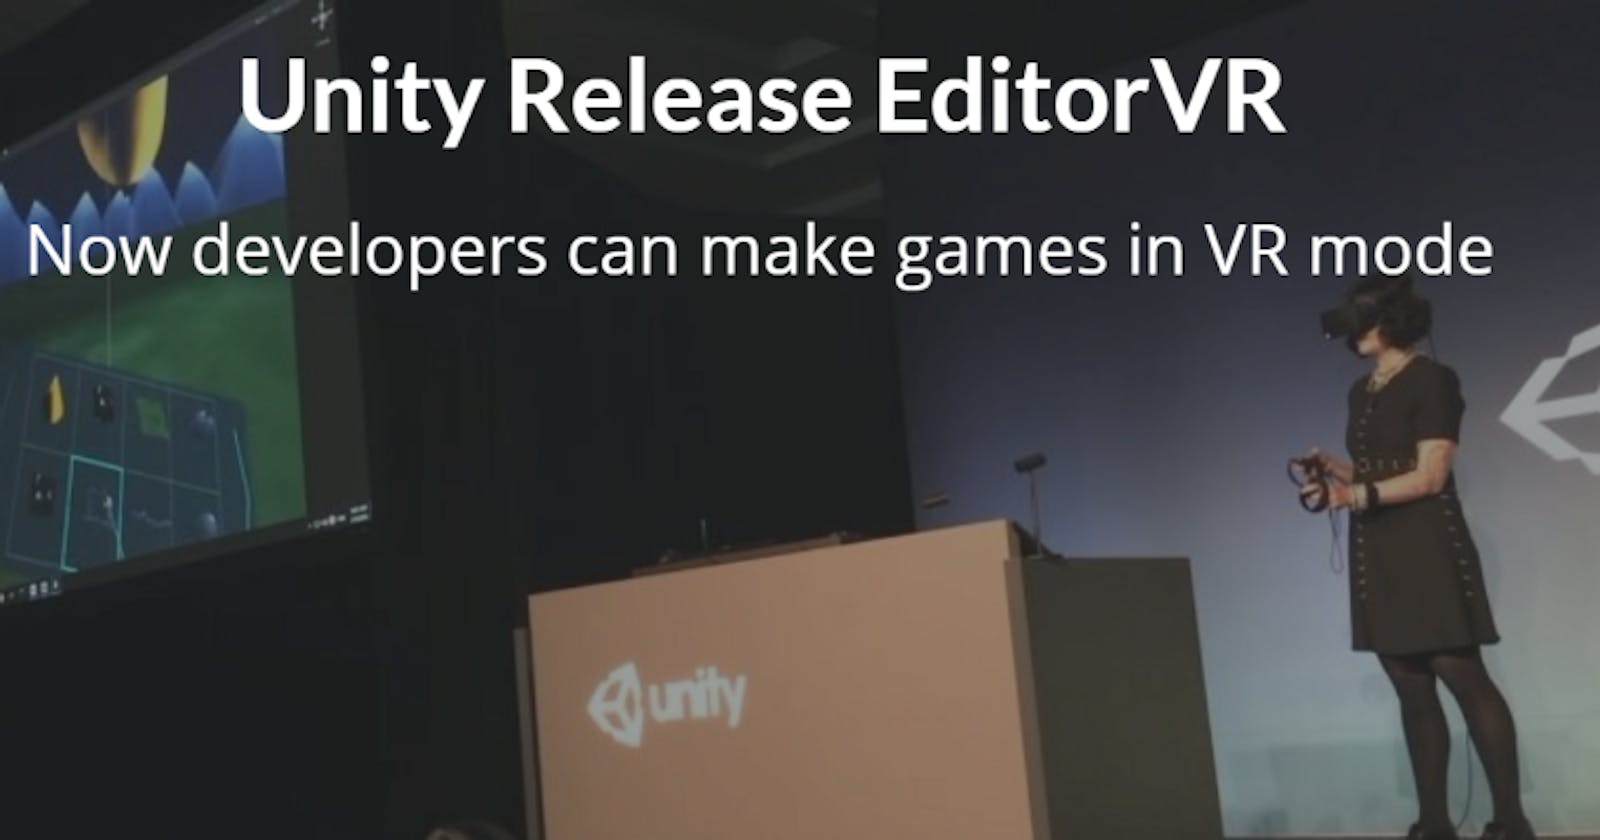 Unity Released EditorVR — Now you can develop games in VR mode !